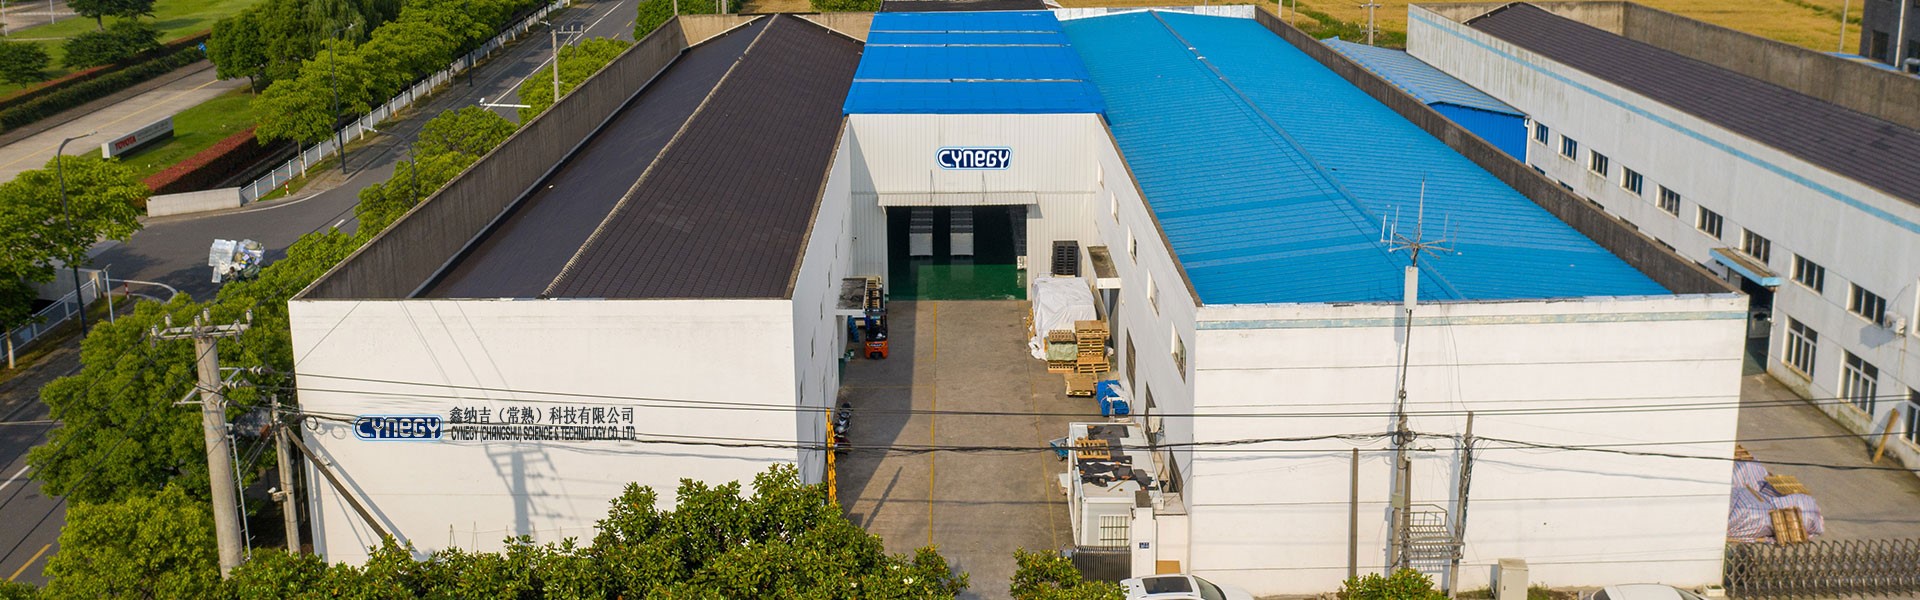 Clinc. Warehouse in China